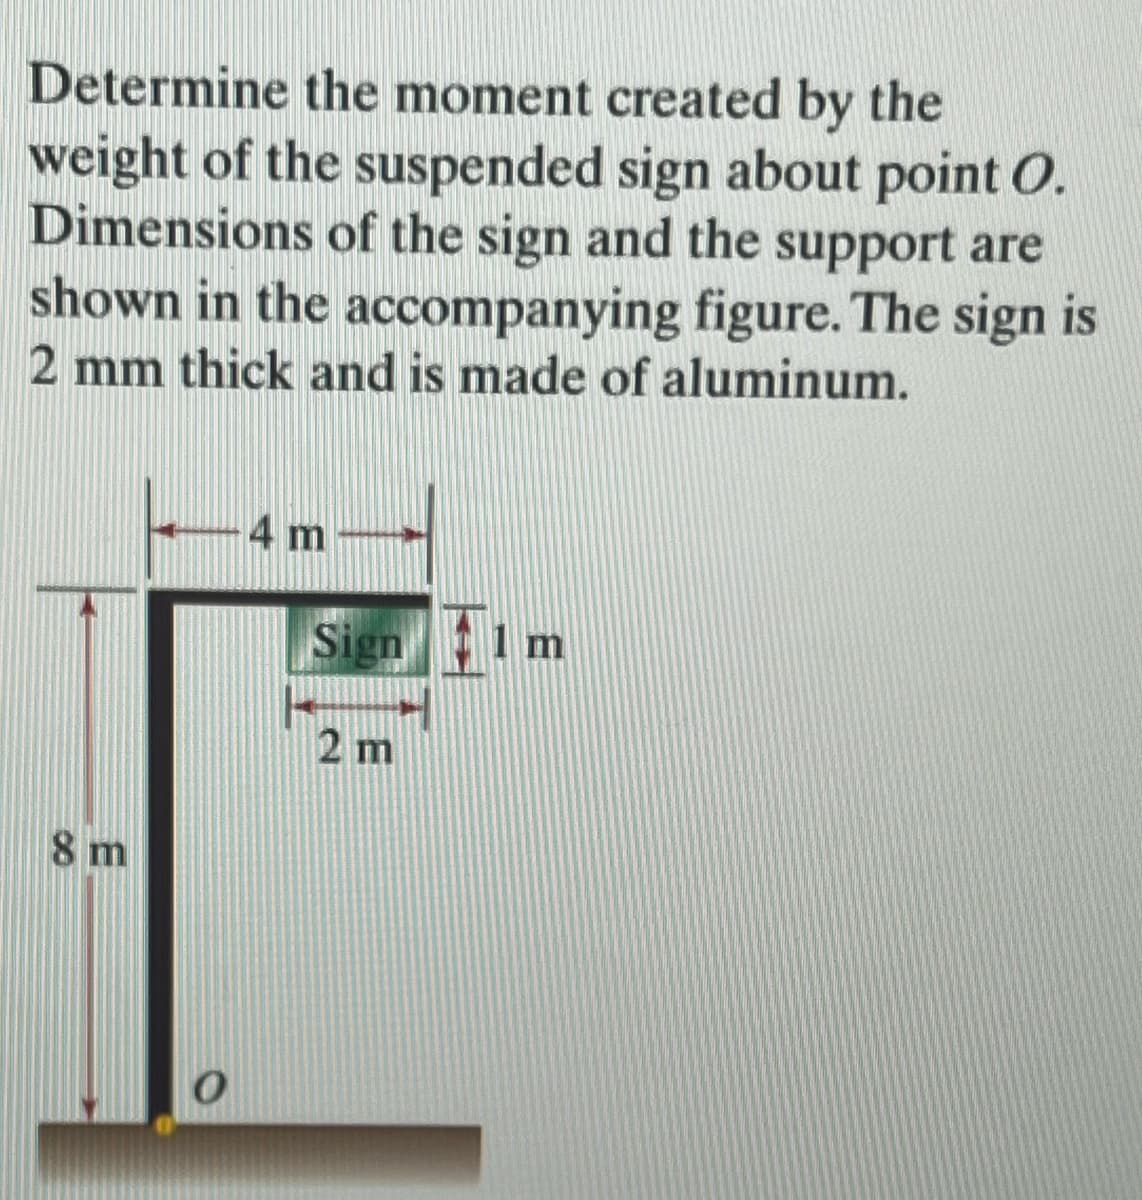 Determine the moment created by the
weight of the suspended sign about point O.
Dimensions of the sign and the support are
shown in the accompanying figure. The sign is
2 mm thick and is made of aluminum.
8 m
4 m
Sign 1 m
2 m